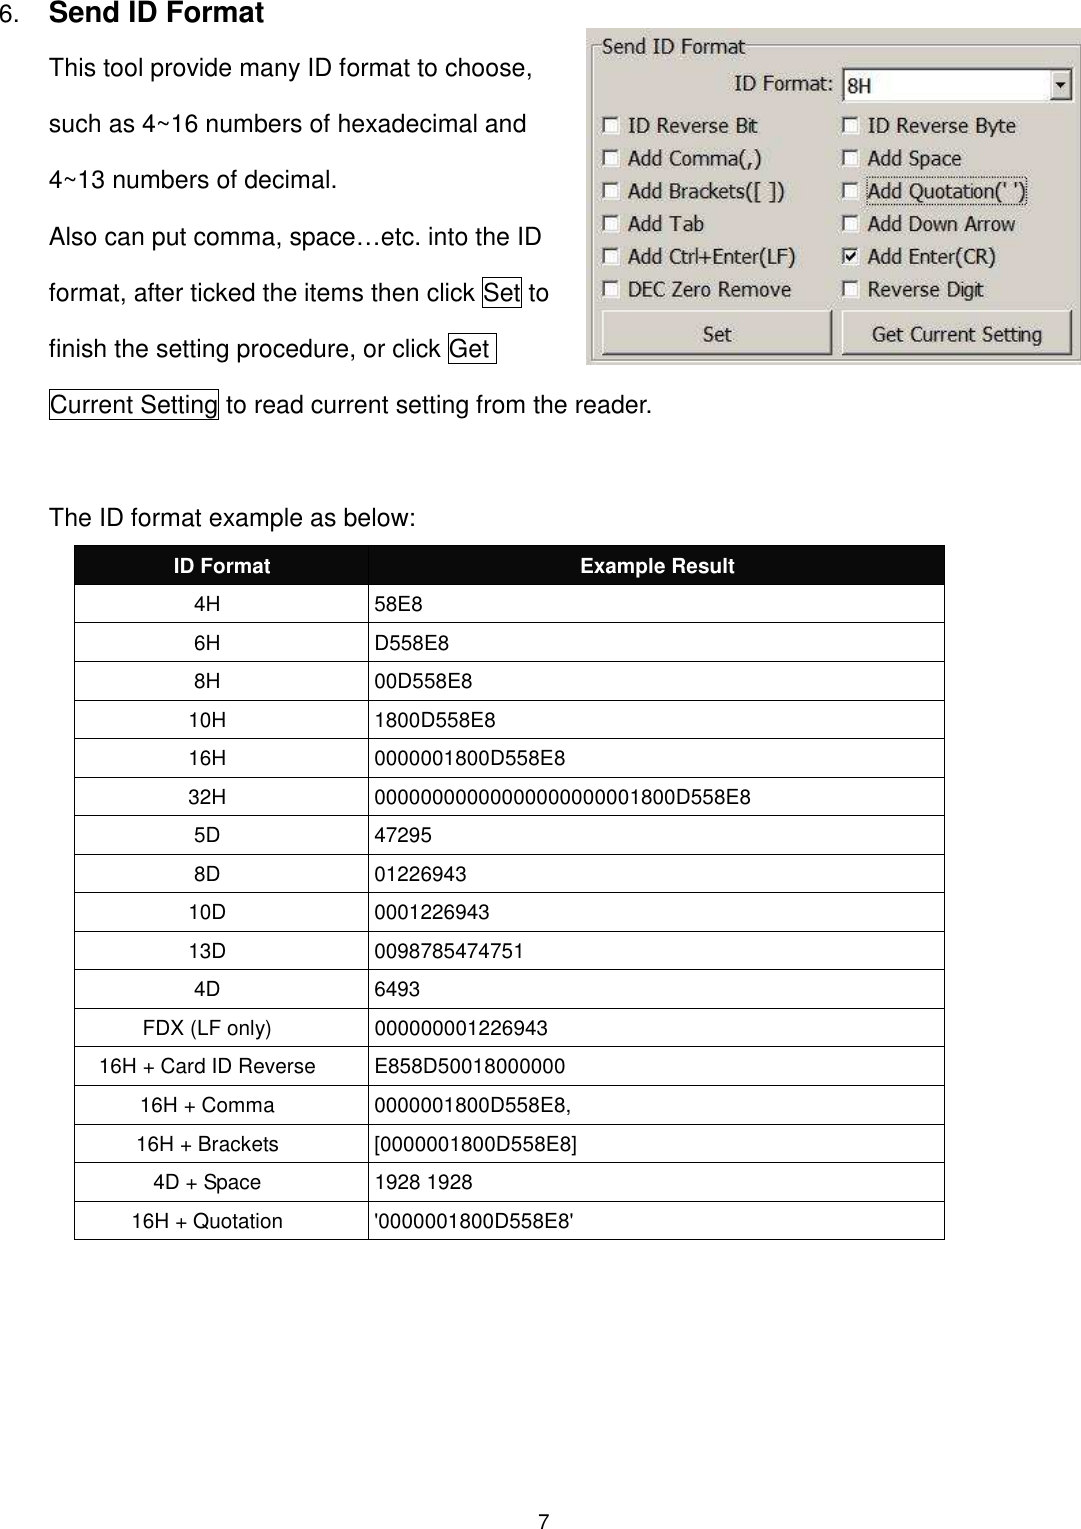 7  6. Send ID Format This tool provide many ID format to choose, such as 4~16 numbers of hexadecimal and 4~13 numbers of decimal.   Also can put comma, space…etc. into the ID format, after ticked the items then click Set to finish the setting procedure, or click Get Current Setting to read current setting from the reader.    The ID format example as below: ID Format  Example Result 4H  58E8 6H  D558E8 8H  00D558E8 10H  1800D558E8   16H  0000001800D558E8 32H  00000000000000000000001800D558E8 5D  47295 8D  01226943 10D  0001226943 13D  0098785474751 4D  6493 FDX (LF only)  000000001226943 16H + Card ID Reverse  E858D50018000000 16H + Comma  0000001800D558E8, 16H + Brackets  [0000001800D558E8] 4D + Space  1928 1928 16H + Quotation  &apos;0000001800D558E8&apos;  